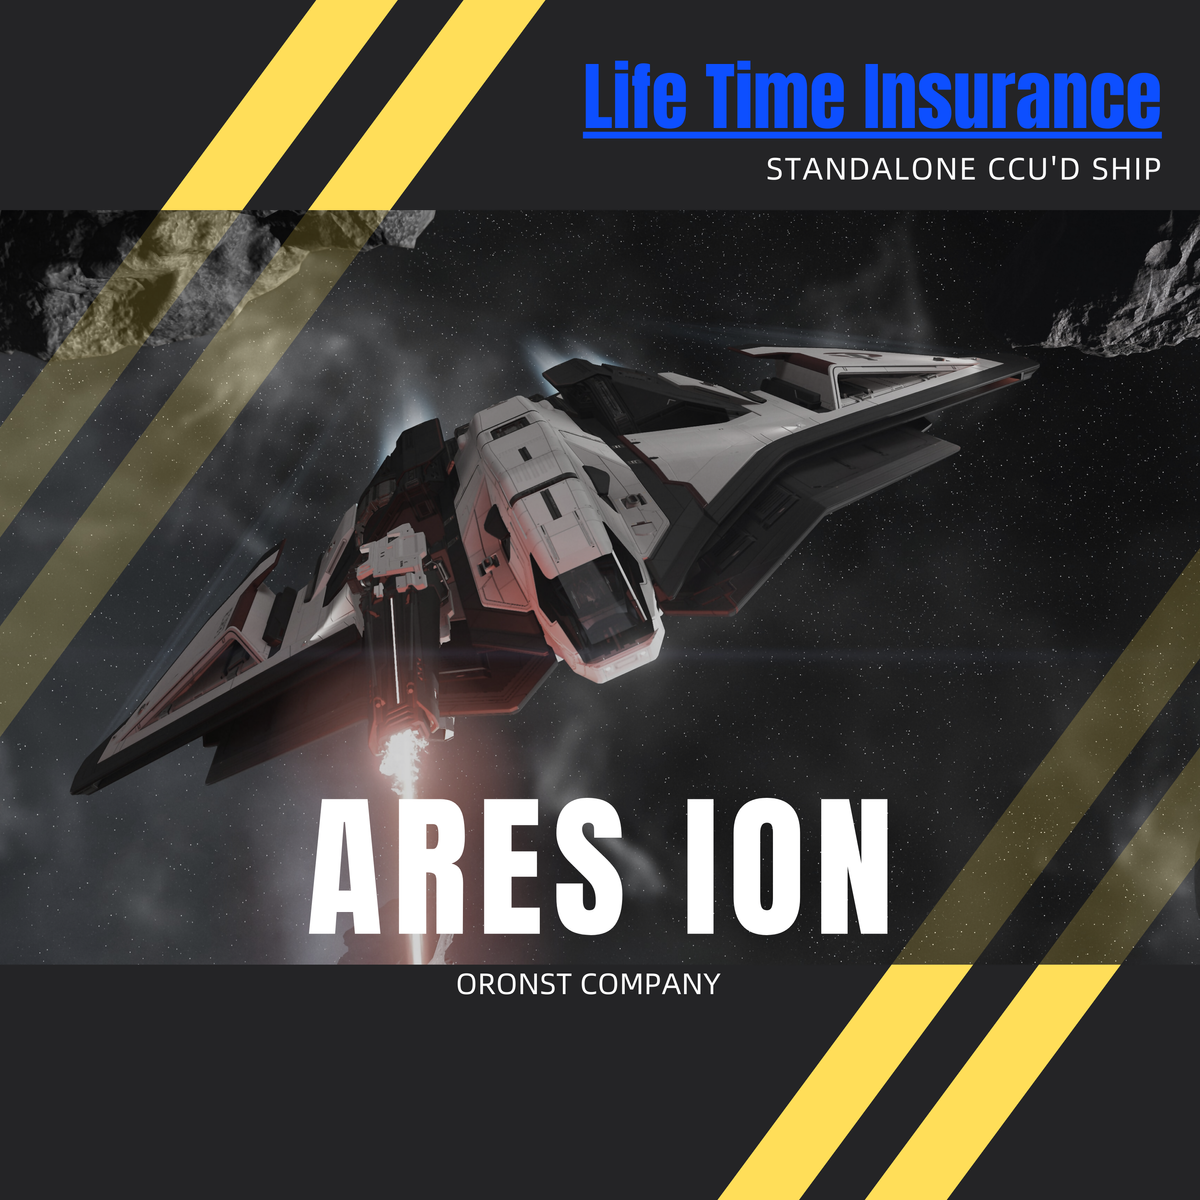 Ares Ion - LTI